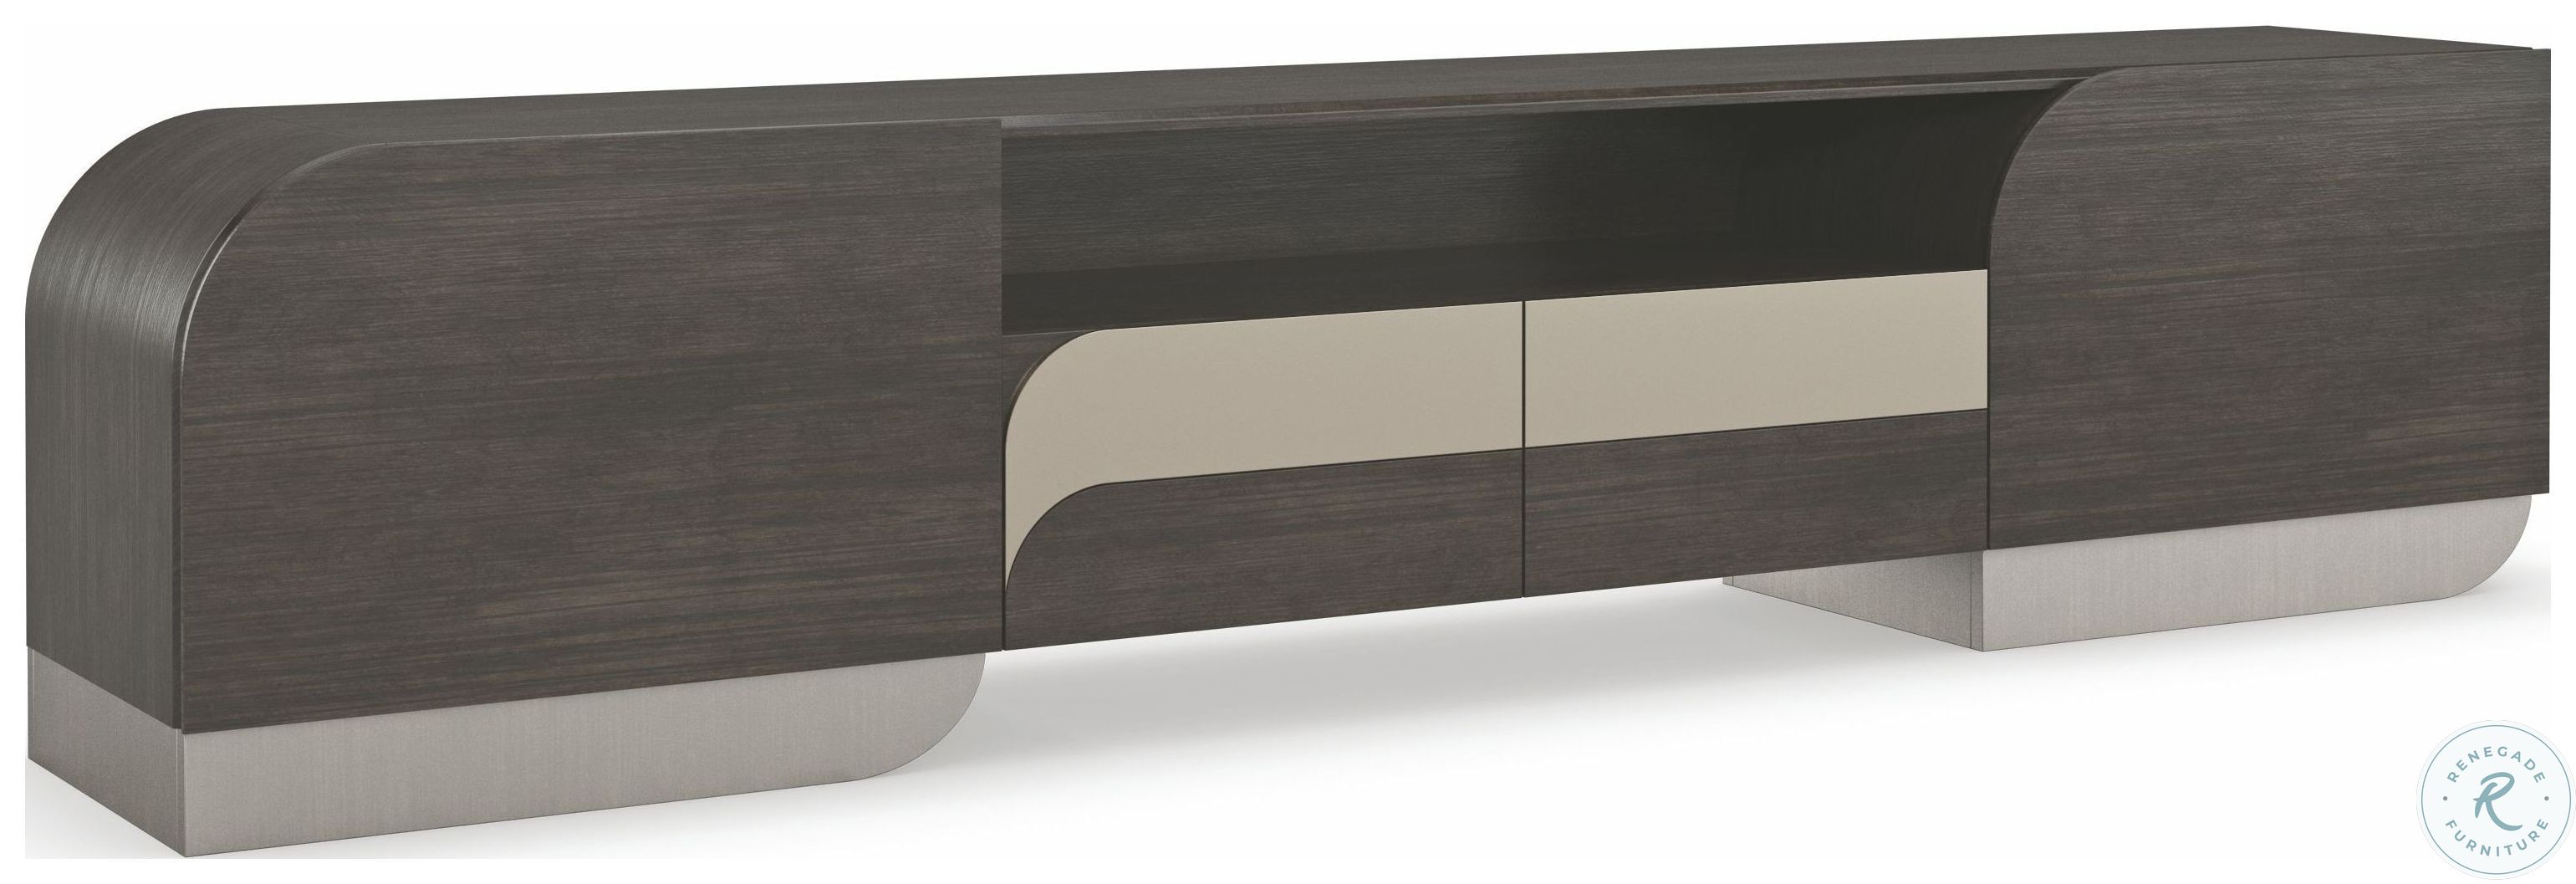 La Moda Sepia And Smoked Stainless Steel Paint TV Stand